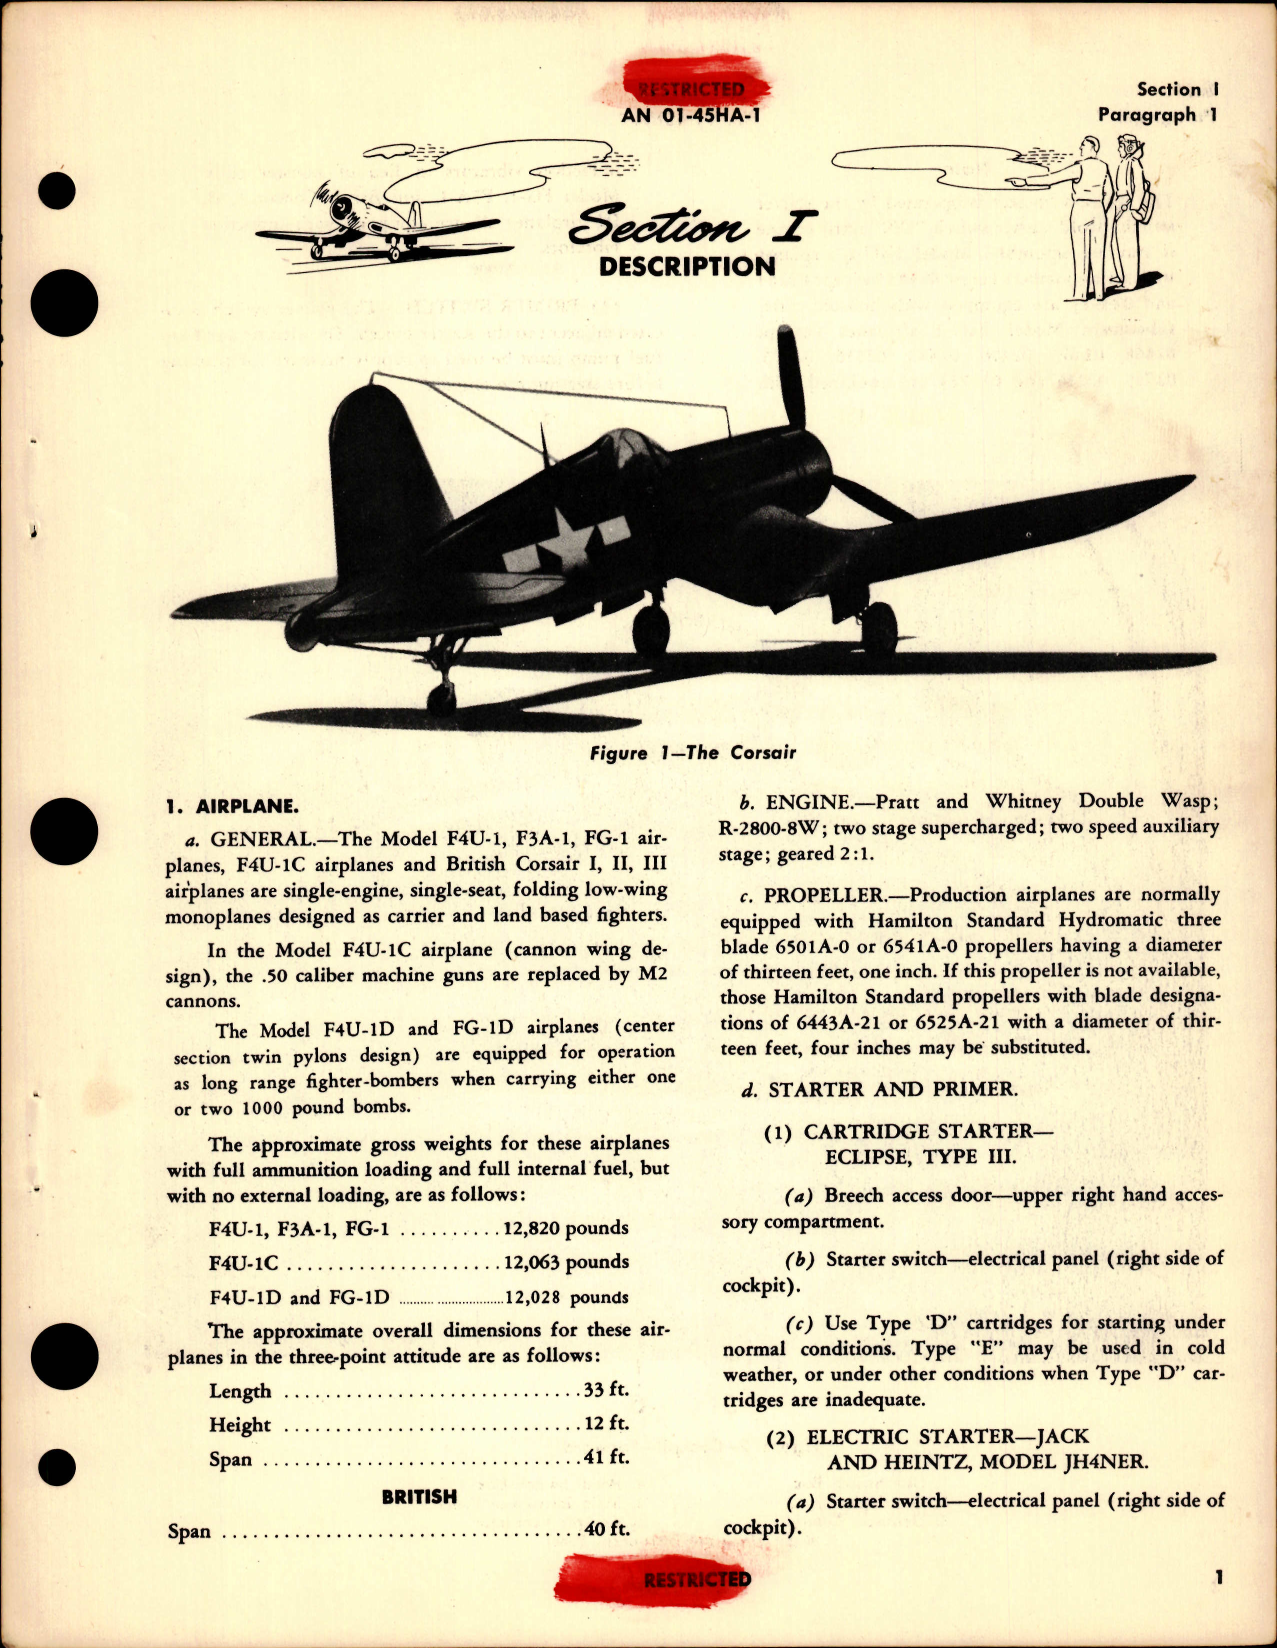 Sample page 7 from AirCorps Library document: Pilot's Handbook for F4U-1, F4U-1C, F4U-1D, F3A-1, FG-1, FG-1D